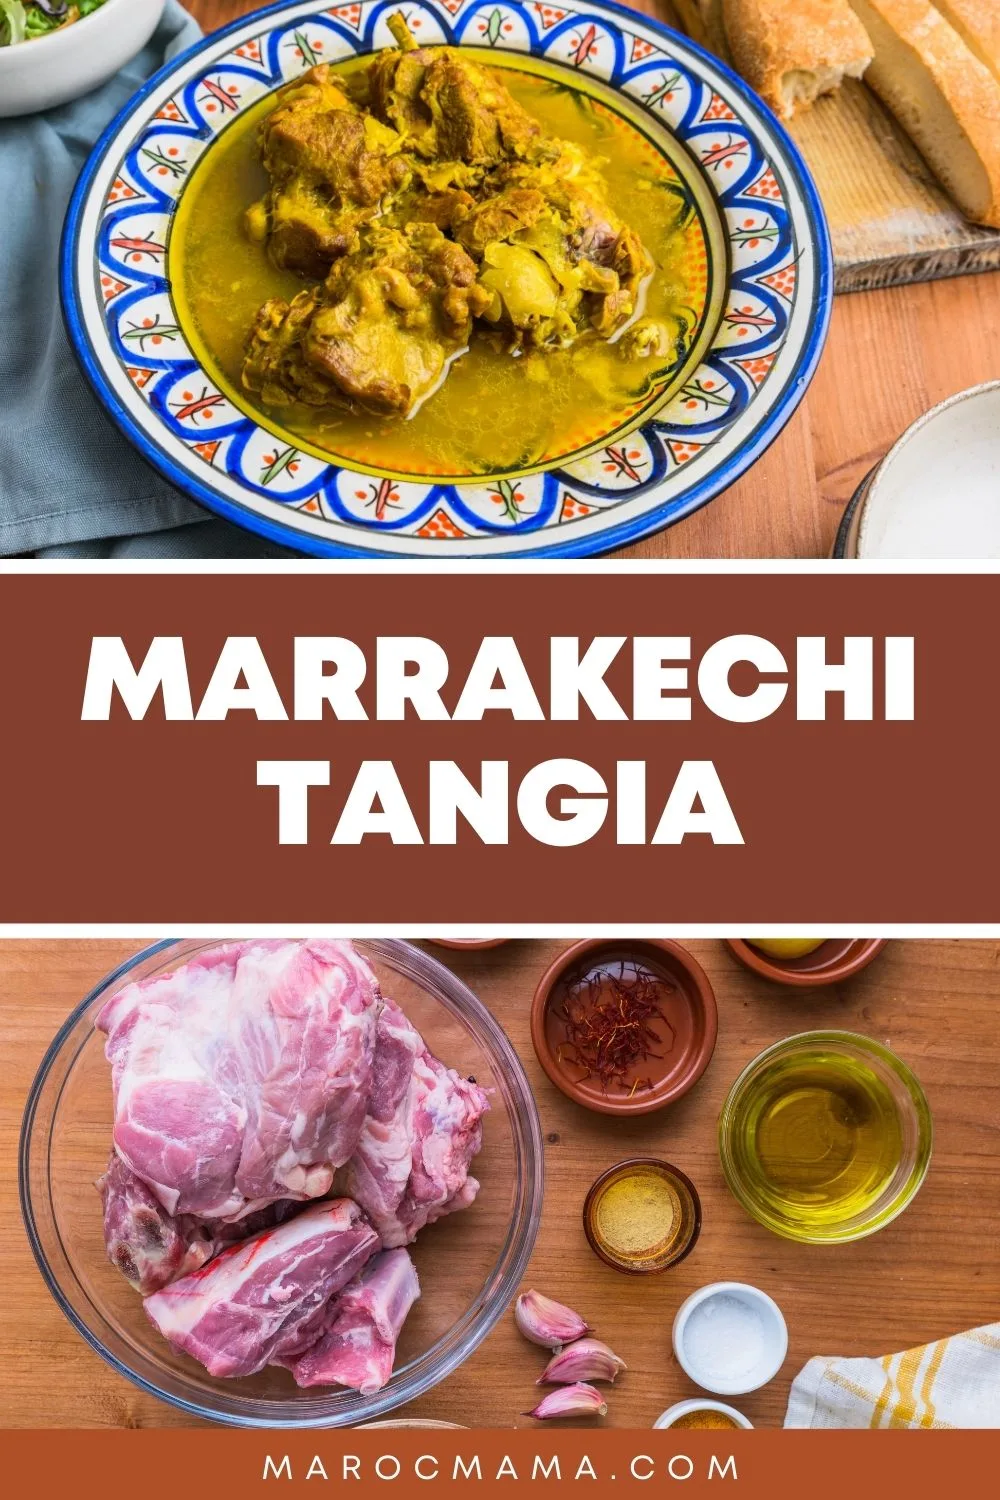 Top image Marrakechi Tangia served on a plate, bottom image is the ingredients in making this dish